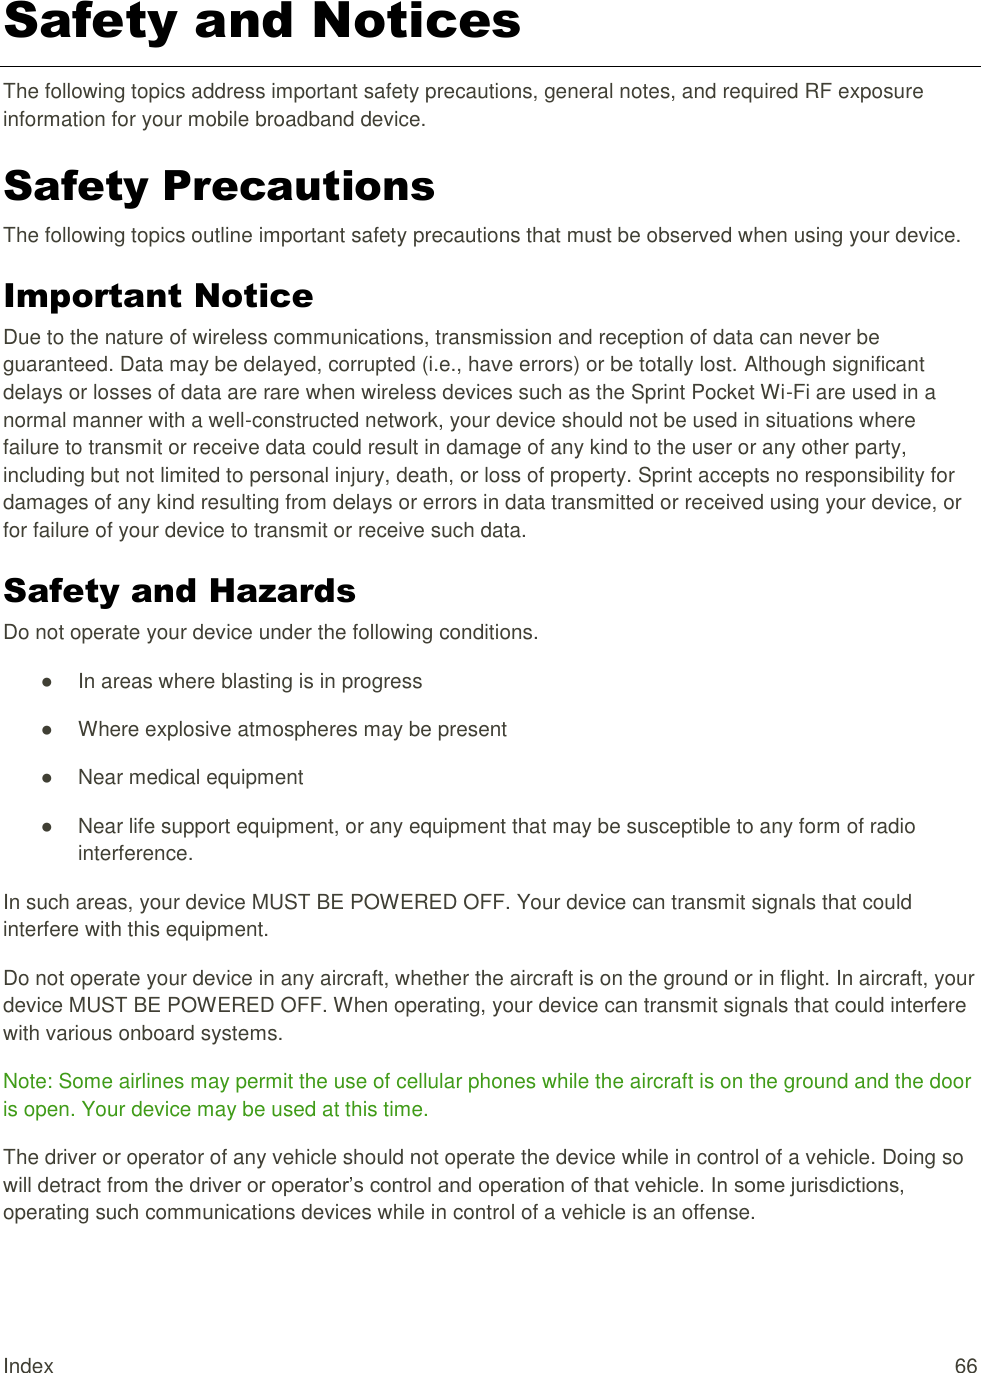 Index  66 Safety and Notices  The following topics address important safety precautions, general notes, and required RF exposure information for your mobile broadband device. Safety Precautions  The following topics outline important safety precautions that must be observed when using your device. Important Notice Due to the nature of wireless communications, transmission and reception of data can never be guaranteed. Data may be delayed, corrupted (i.e., have errors) or be totally lost. Although significant delays or losses of data are rare when wireless devices such as the Sprint Pocket Wi-Fi are used in a normal manner with a well-constructed network, your device should not be used in situations where failure to transmit or receive data could result in damage of any kind to the user or any other party, including but not limited to personal injury, death, or loss of property. Sprint accepts no responsibility for damages of any kind resulting from delays or errors in data transmitted or received using your device, or for failure of your device to transmit or receive such data. Safety and Hazards Do not operate your device under the following conditions.  ●  In areas where blasting is in progress  ●  Where explosive atmospheres may be present  ●  Near medical equipment  ●  Near life support equipment, or any equipment that may be susceptible to any form of radio interference.  In such areas, your device MUST BE POWERED OFF. Your device can transmit signals that could interfere with this equipment. Do not operate your device in any aircraft, whether the aircraft is on the ground or in flight. In aircraft, your device MUST BE POWERED OFF. When operating, your device can transmit signals that could interfere with various onboard systems. Note: Some airlines may permit the use of cellular phones while the aircraft is on the ground and the door is open. Your device may be used at this time. The driver or operator of any vehicle should not operate the device while in control of a vehicle. Doing so will detract from the driver or operator’s control and operation of that vehicle. In some jurisdictions, operating such communications devices while in control of a vehicle is an offense. 